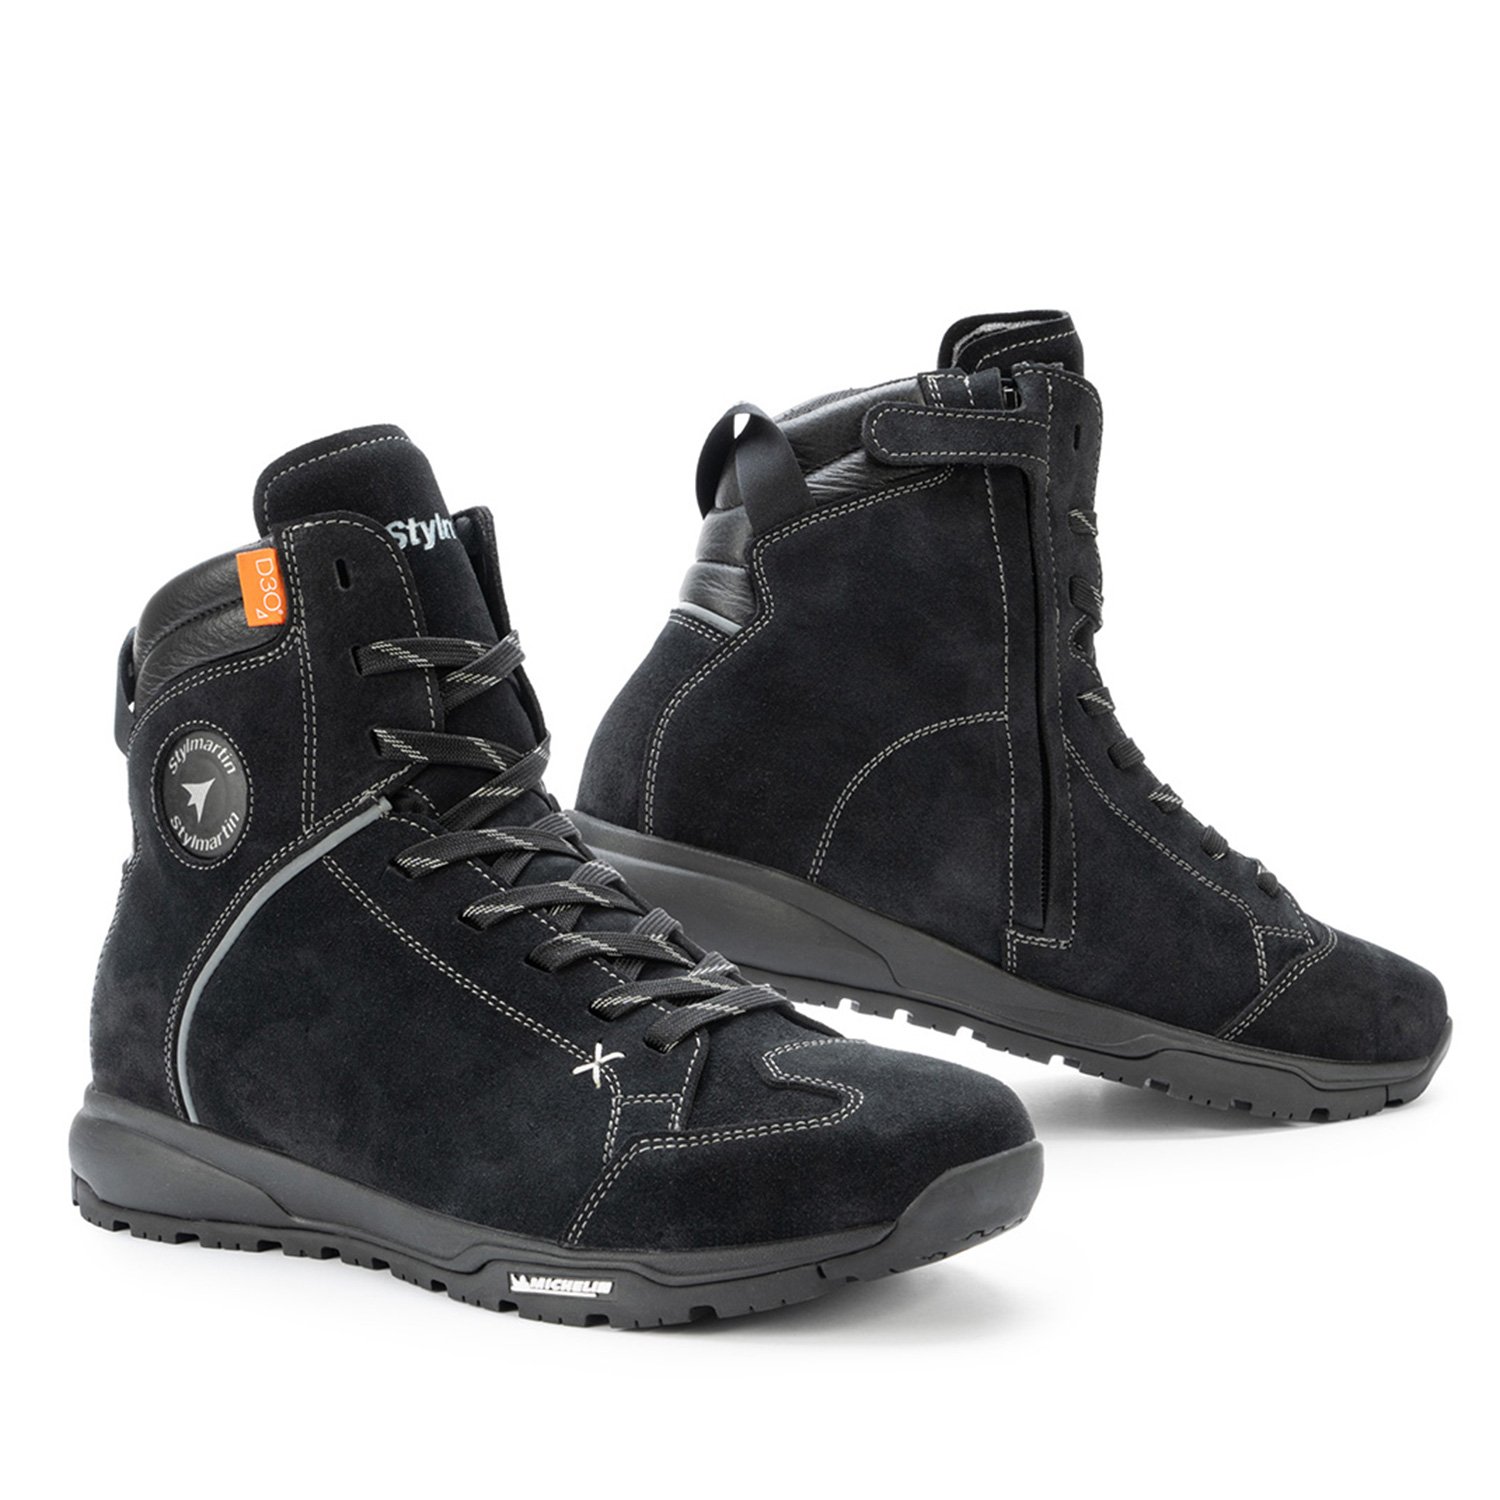 Image of Stylmartin Zed WP Sneakers Black Size 41 ID 1000001362434